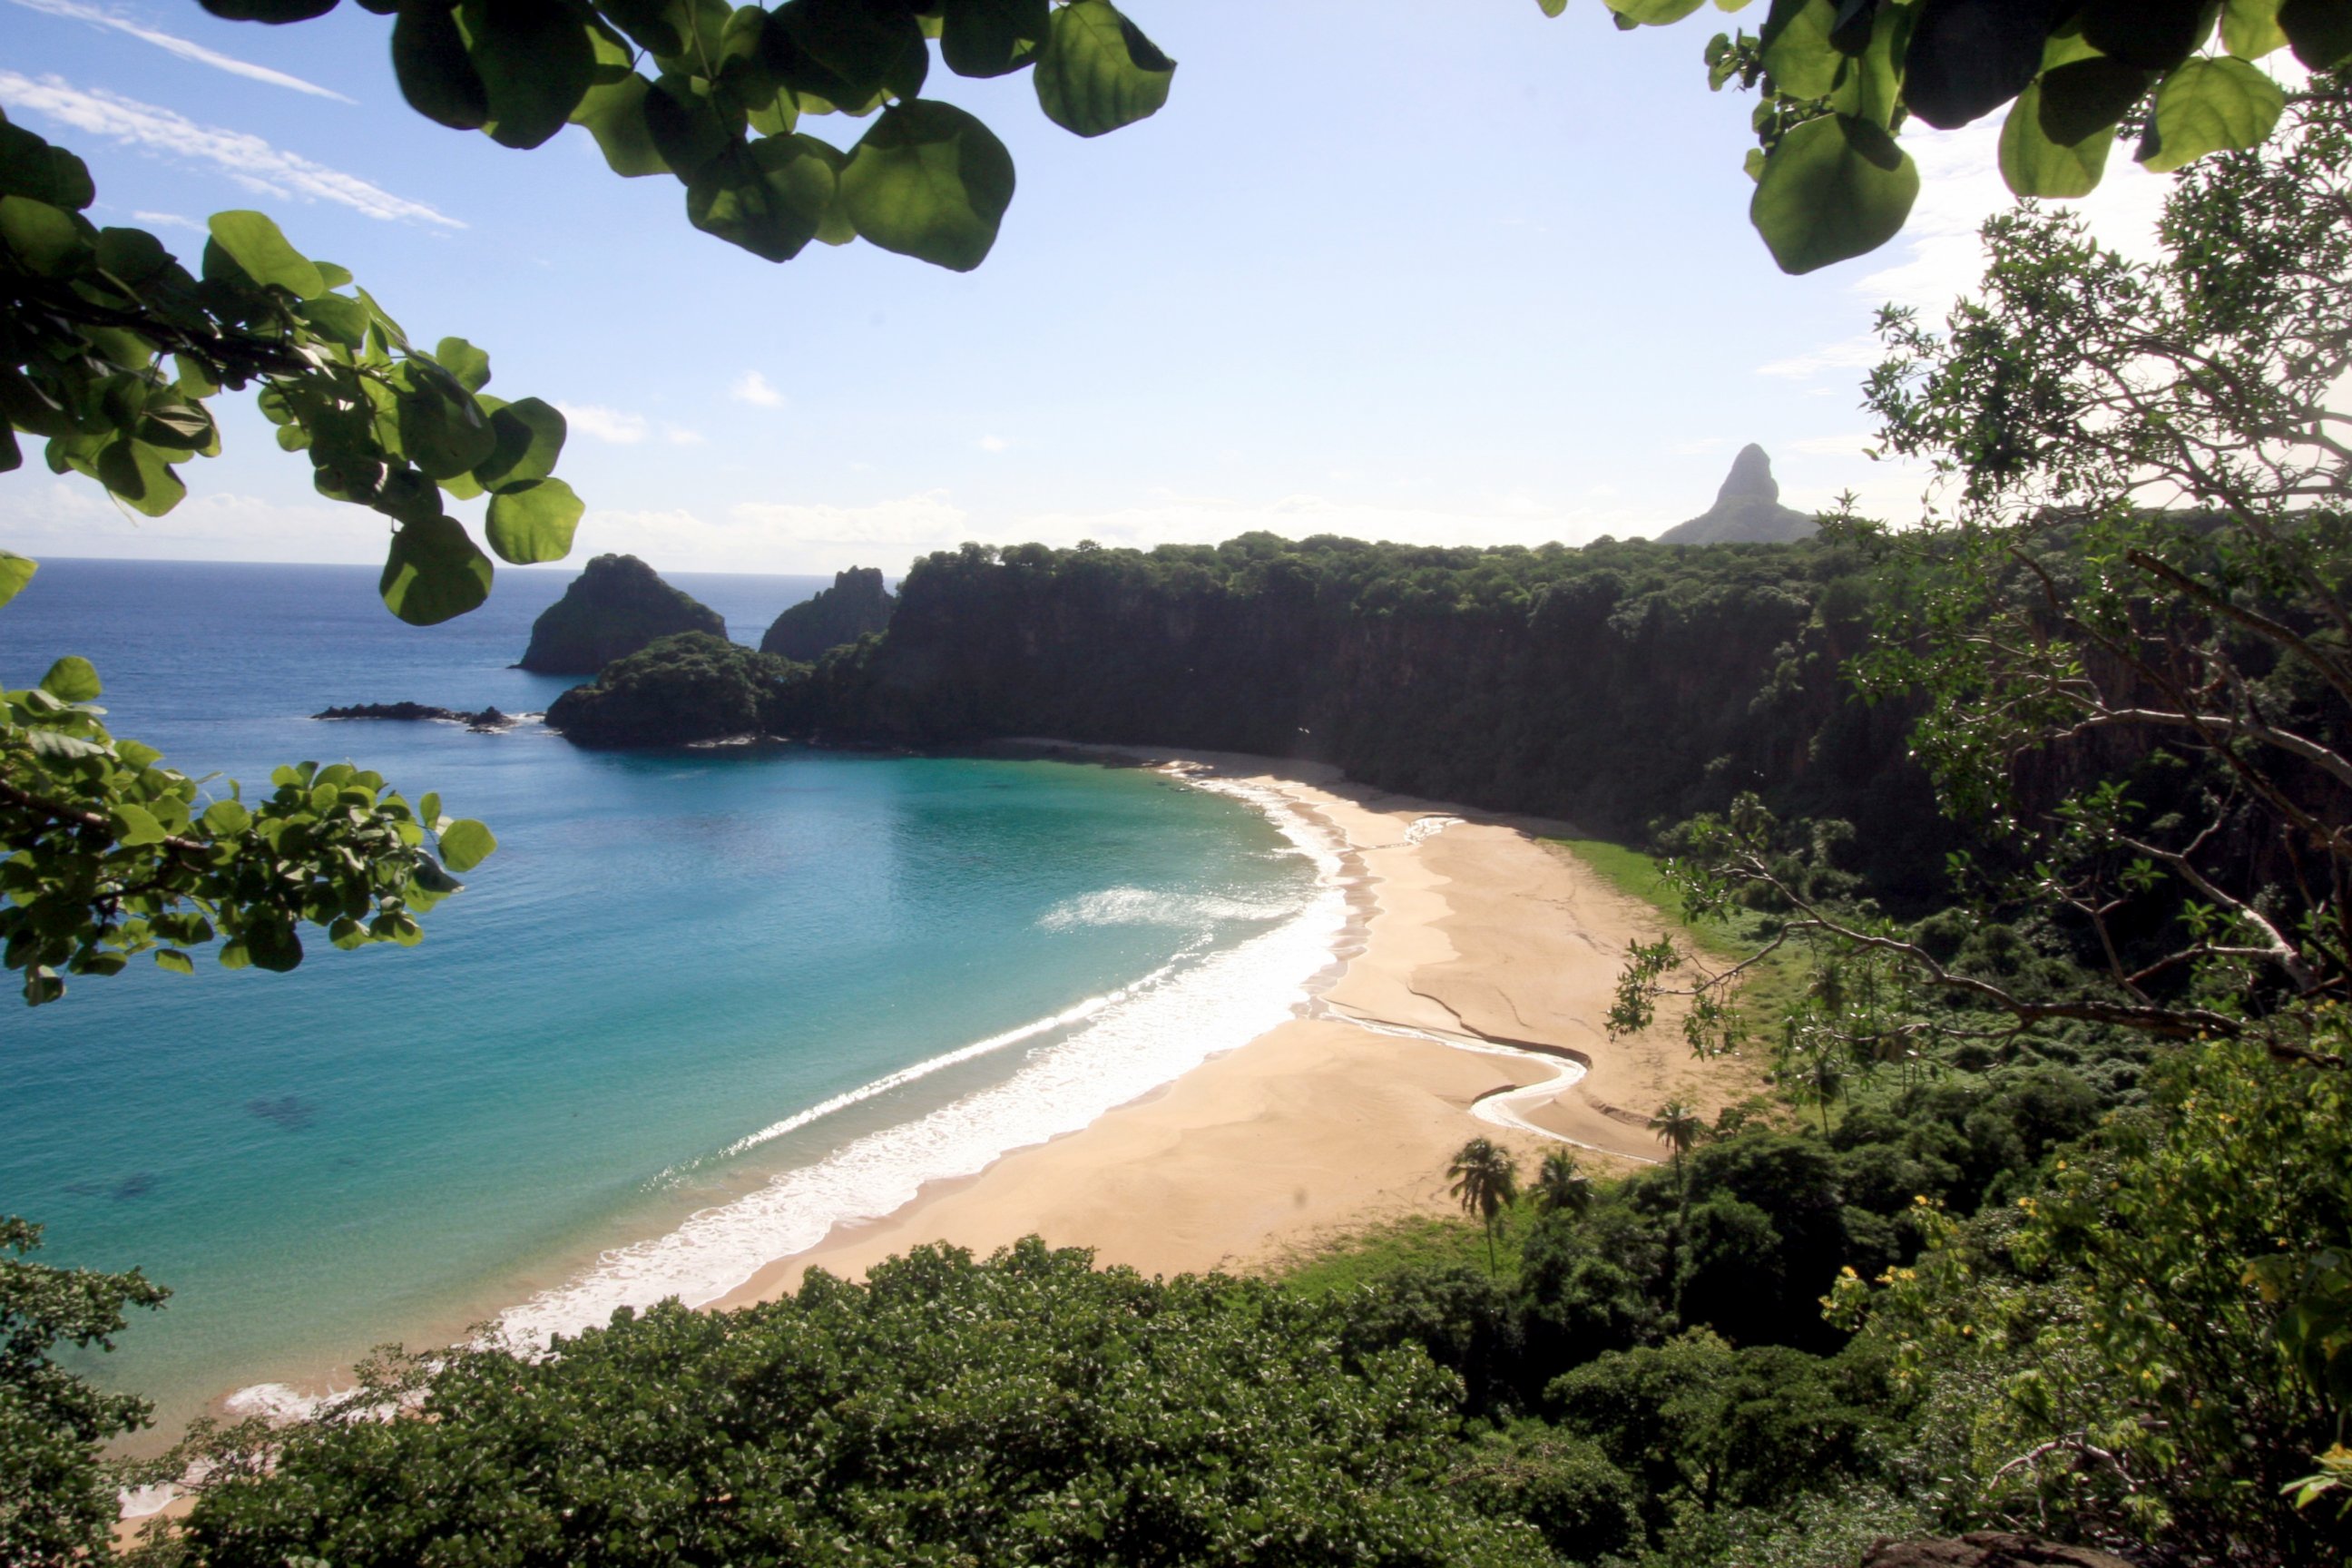 PHOTO: With over 5,800 reviews on TripAdvisor, Baia do Sancho, Brazil is the travelers’ pick for number one beach in the world.